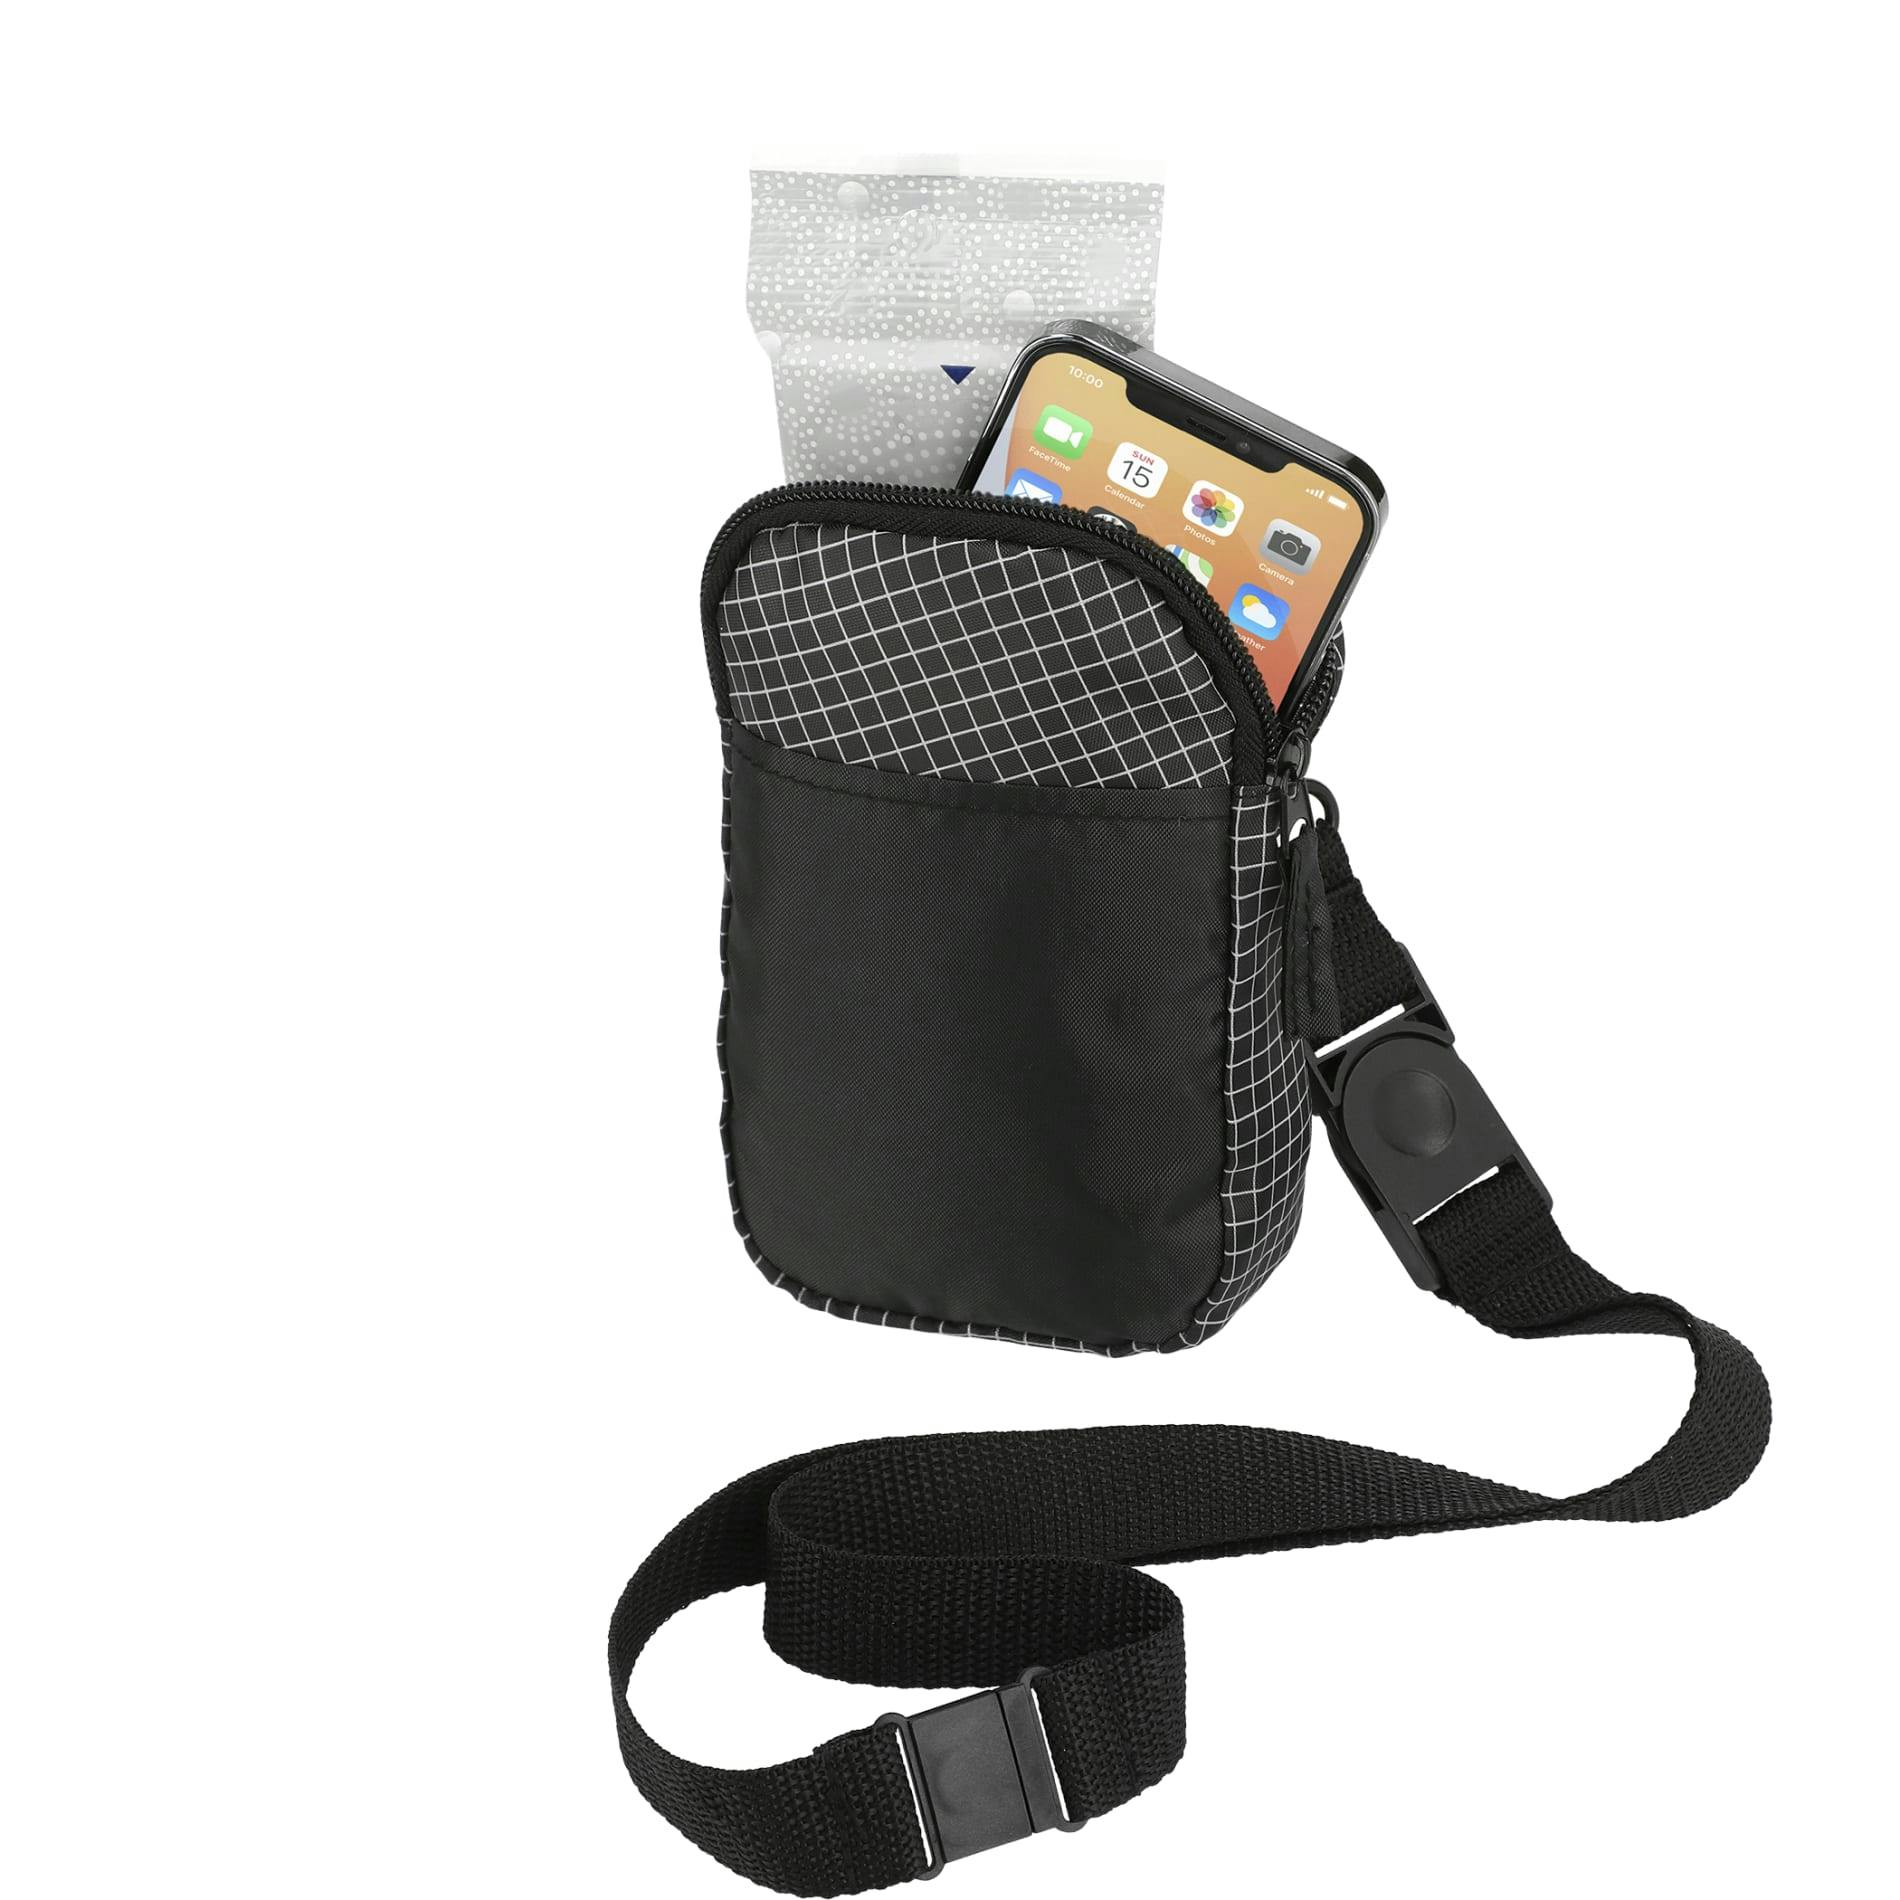 Grid Lanyard Phone Pouch - additional Image 5